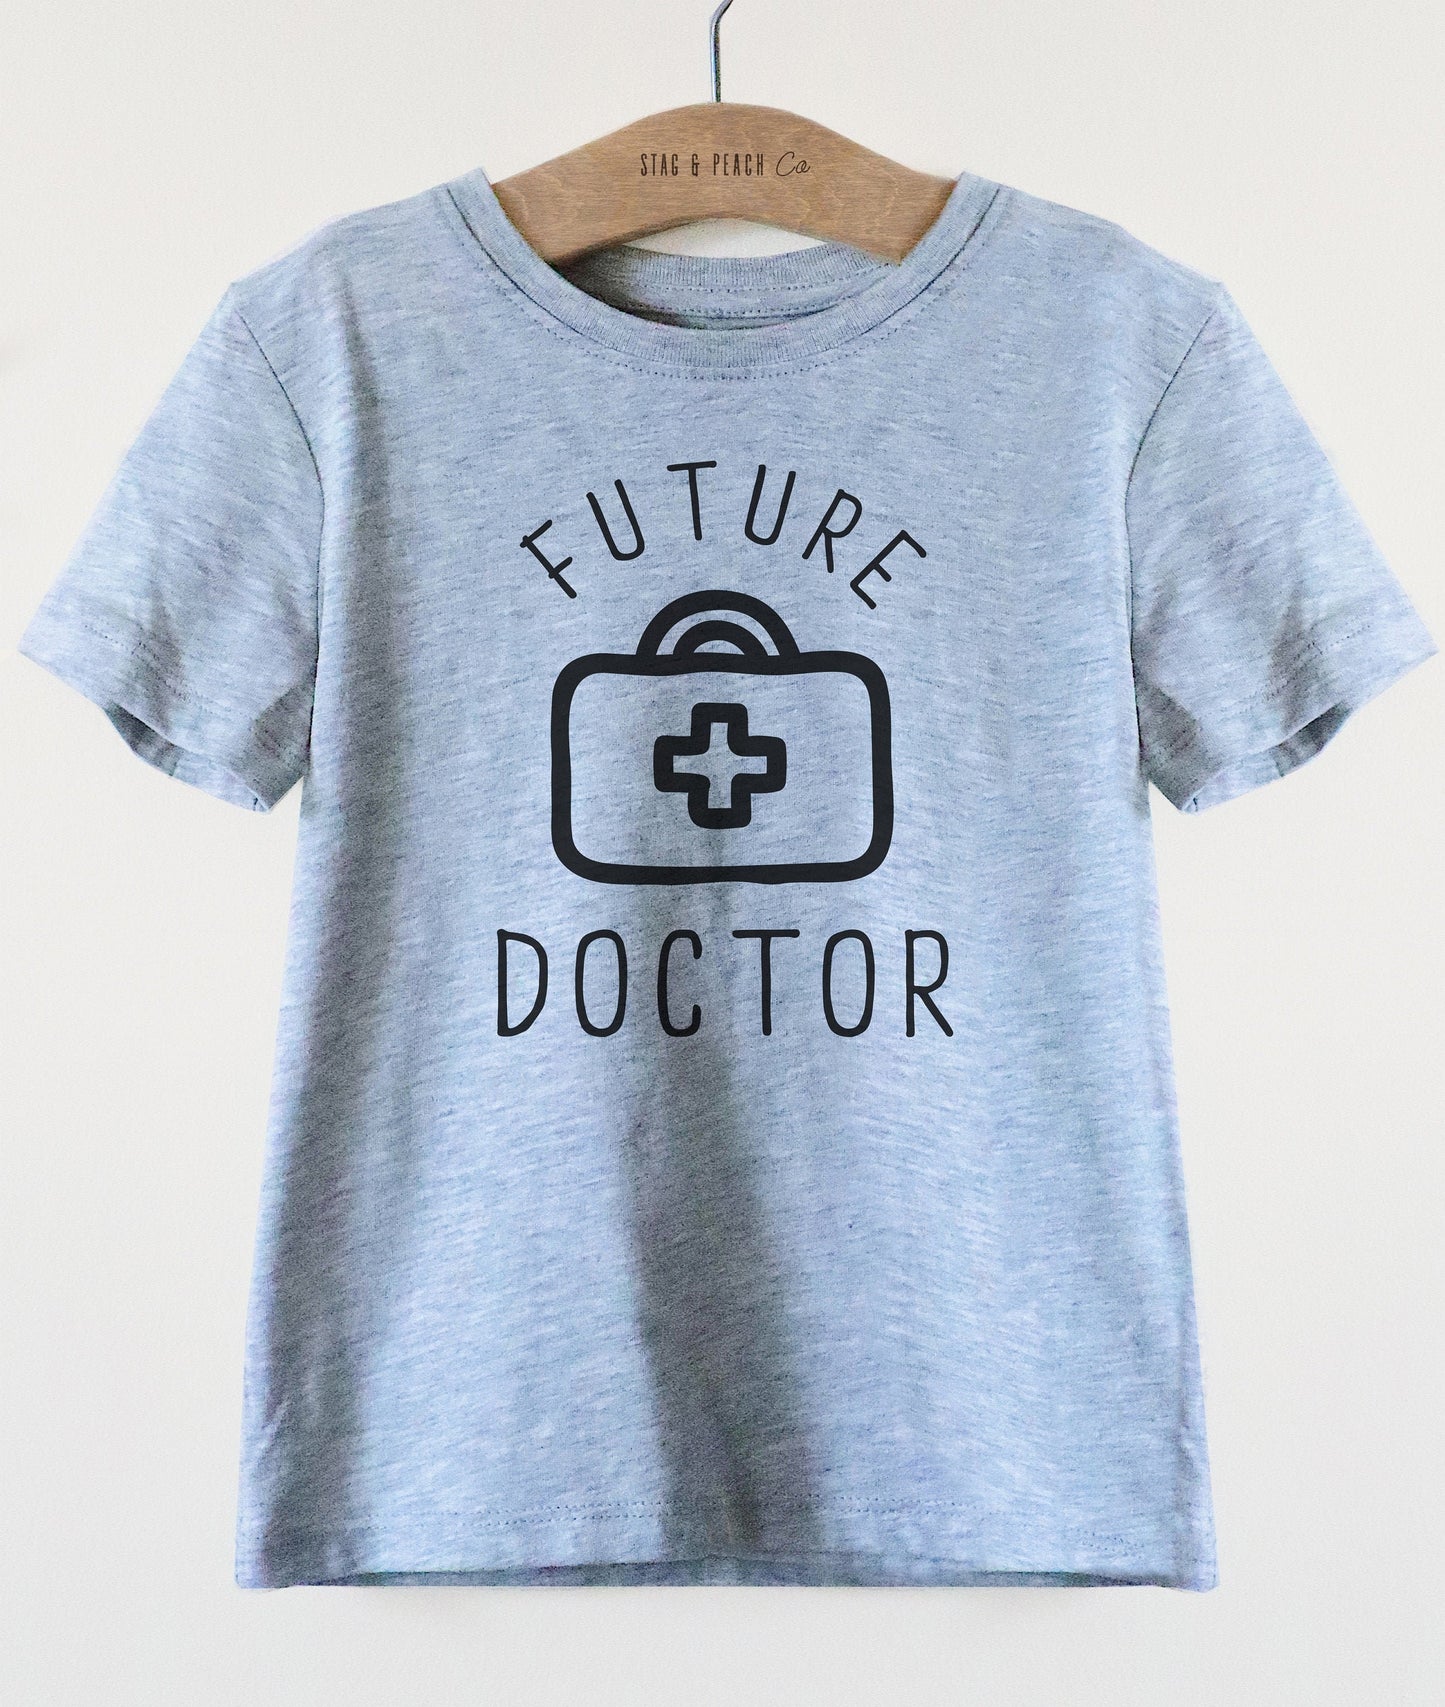 Kids Doctor Shirt - Future Doctor Kids Shirt, Forget Princess Youth Tee, Doctor Toddler Shirt,  Girl Clothes, Doctor Baby, Boy Clothes